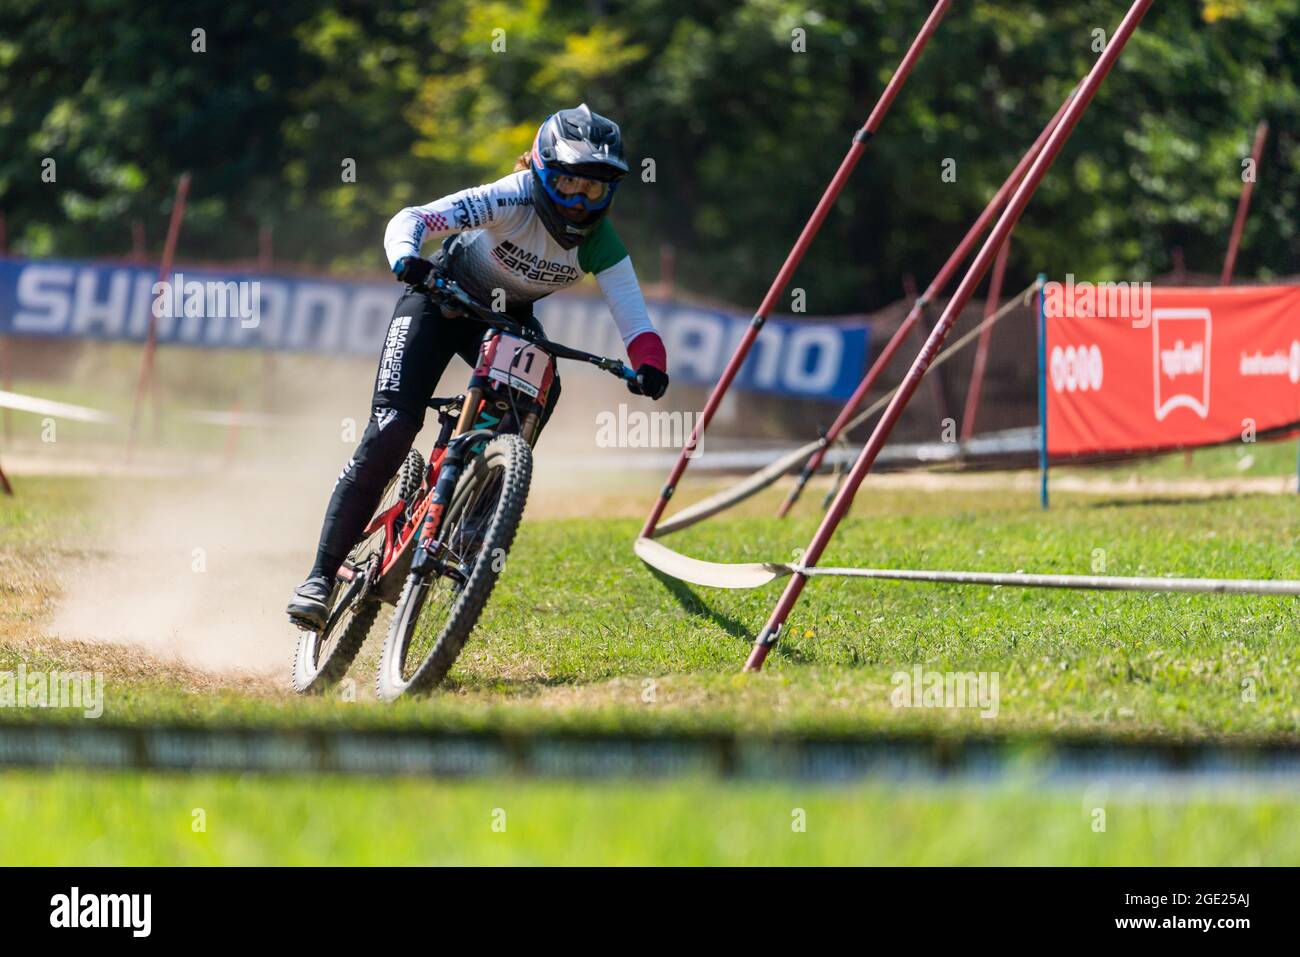 WIDMANN Veronika of Italy during the 2021 Mountain Bike World Cup on August 15, 2021 in Maribor, Slovenia - Photo Olly Bowman / DPPI Stock Photo